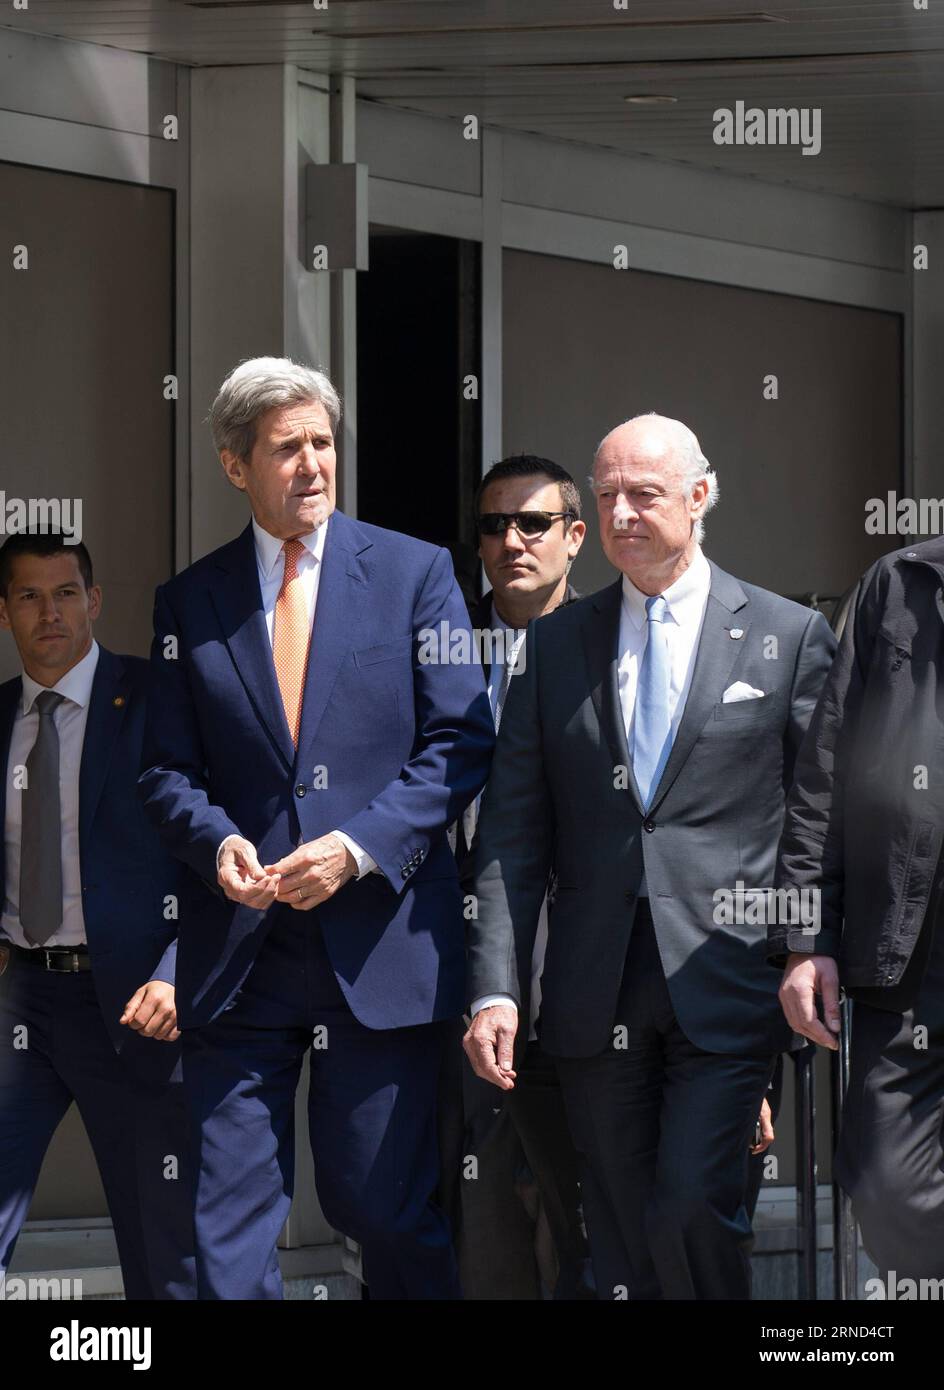 (160502) -- GENEVA, May 2, 2016 -- U.S. Secretary of State John Kerry (L, front) and UN Special Envoy for Syria Staffan de Mistura (R, front) arrive for a press conference after their meeting in a hotel in Geneva, Switzerland, May 2, 2016. U.S. Secretary of State John Kerry on Monday urged all parties to the Syrian conflict to end violence and restore the cessation of hostilities during his second day trip here for talks focusing on the Syrian situation. ) SWITZERLAND-GENEVA-SYRIAN CONFLICT-US-KERRY XuxJinquan PUBLICATIONxNOTxINxCHN   160502 Geneva May 2 2016 U S Secretary of State John Kerry Stock Photo